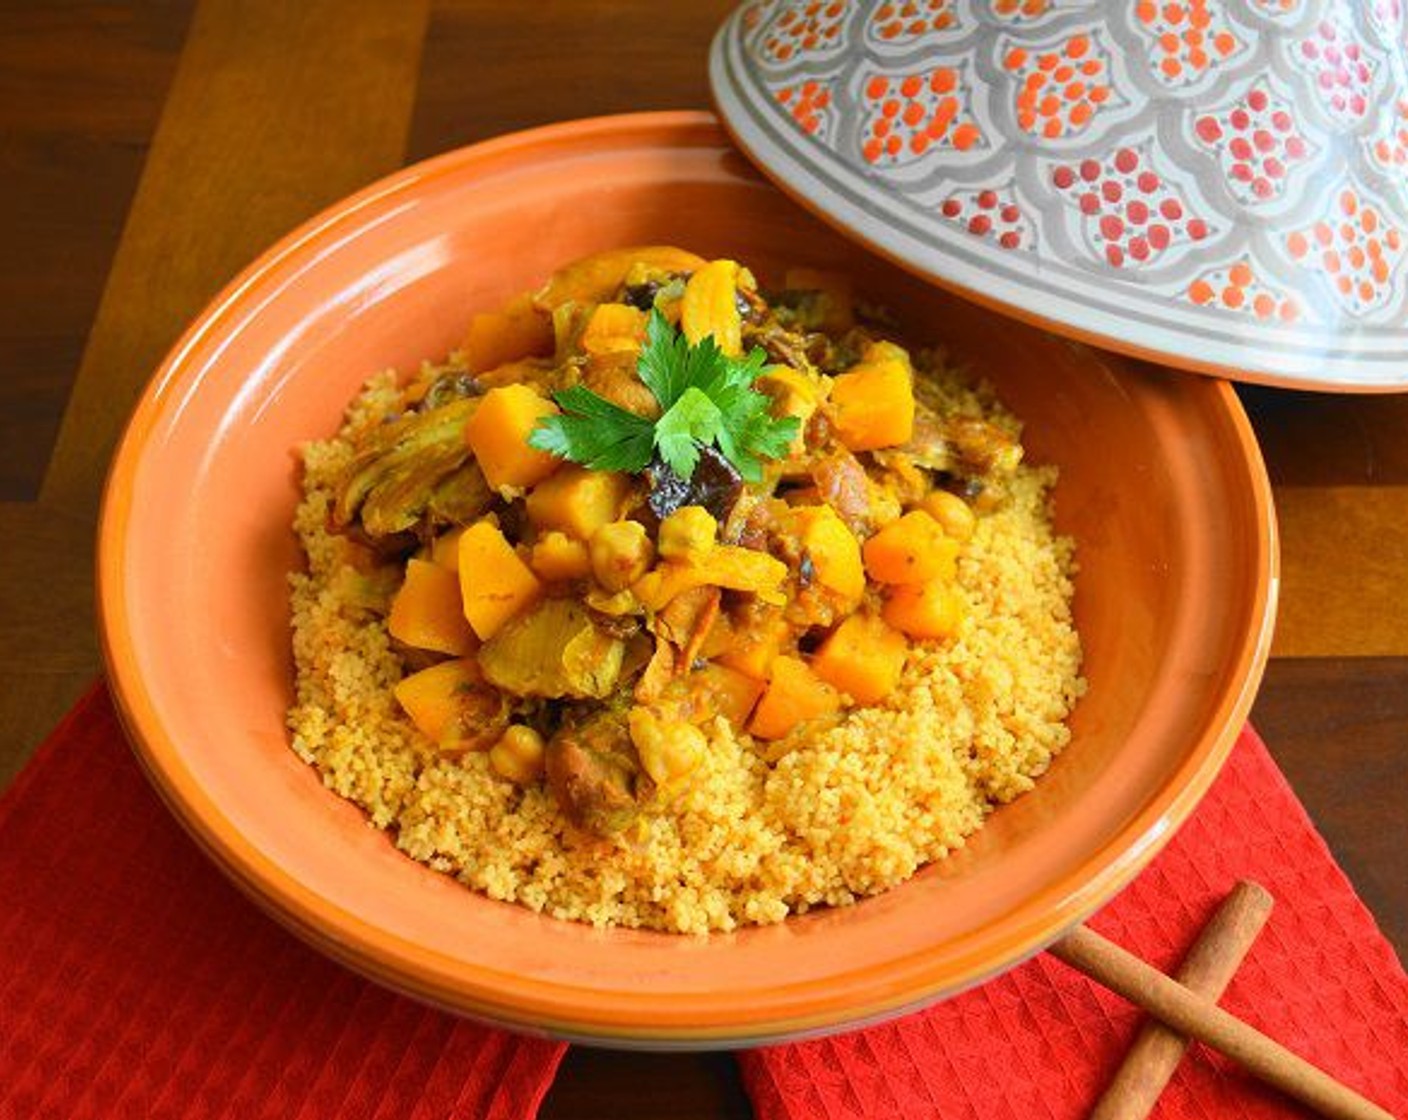 step 12 Scoop the couscous into pretty bowls and ladle a generous portion of the Moroccan chicken over it. Garnish with Fresh Parsley (to taste) and serve immediately! This can also be served family style in a pretty tagine.